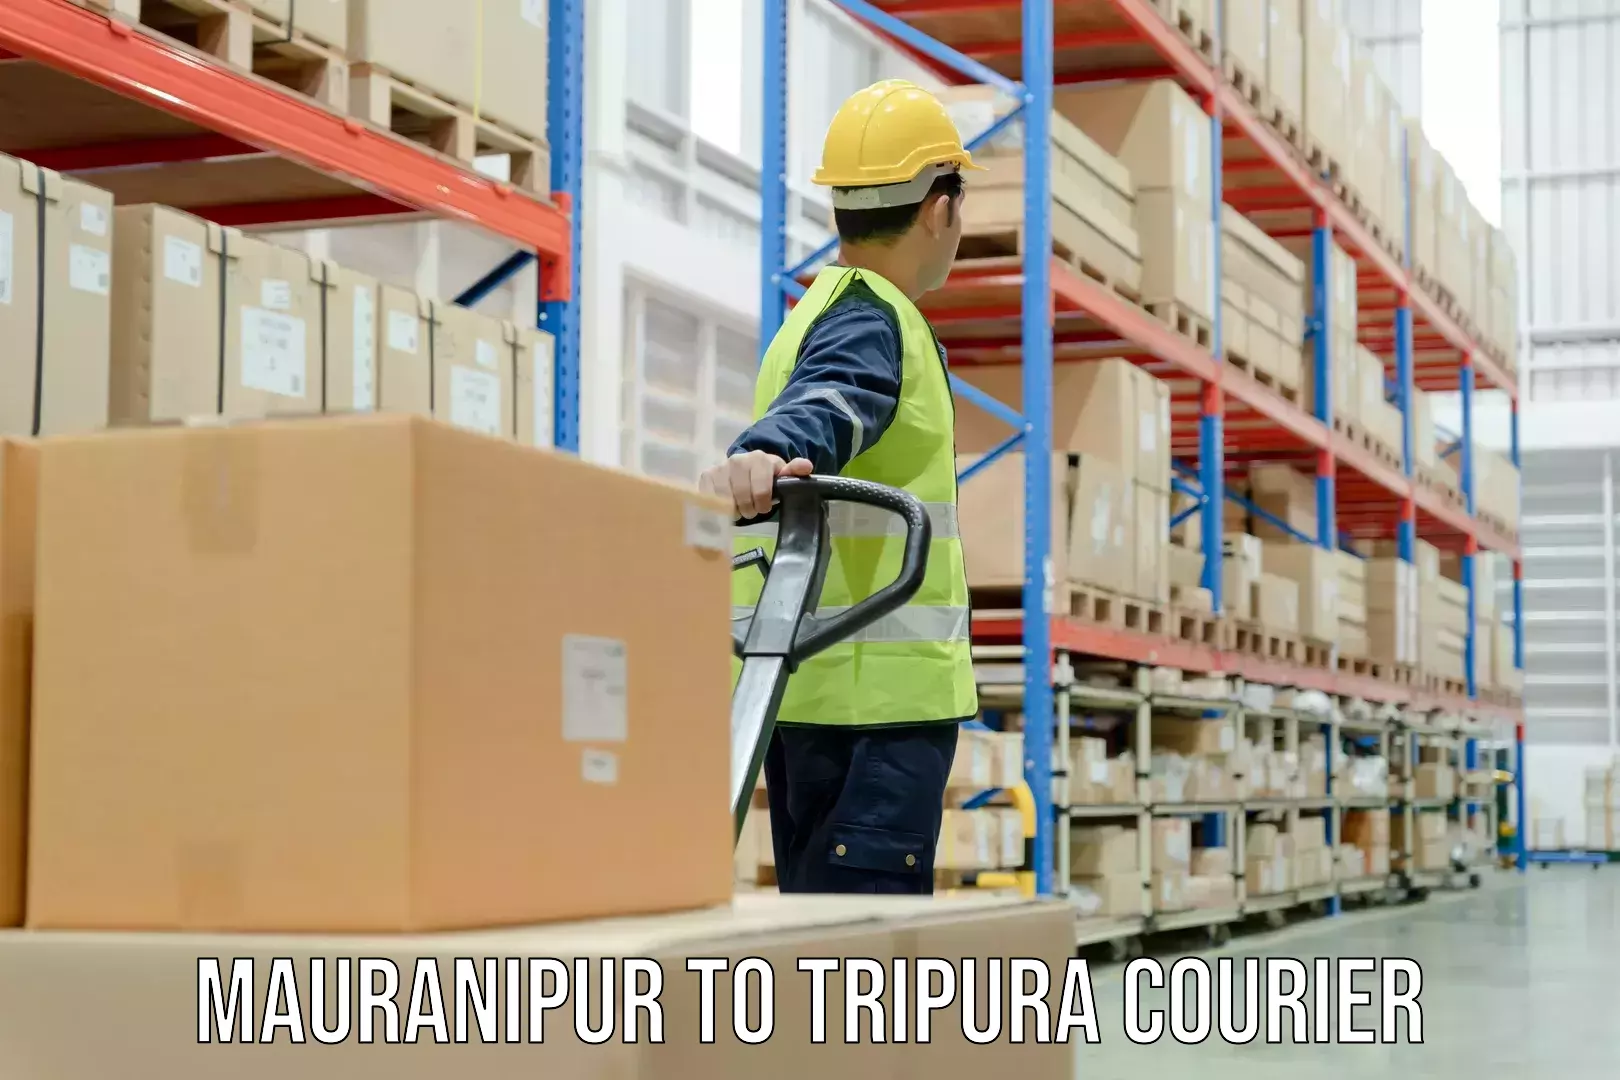 Large package courier Mauranipur to Agartala